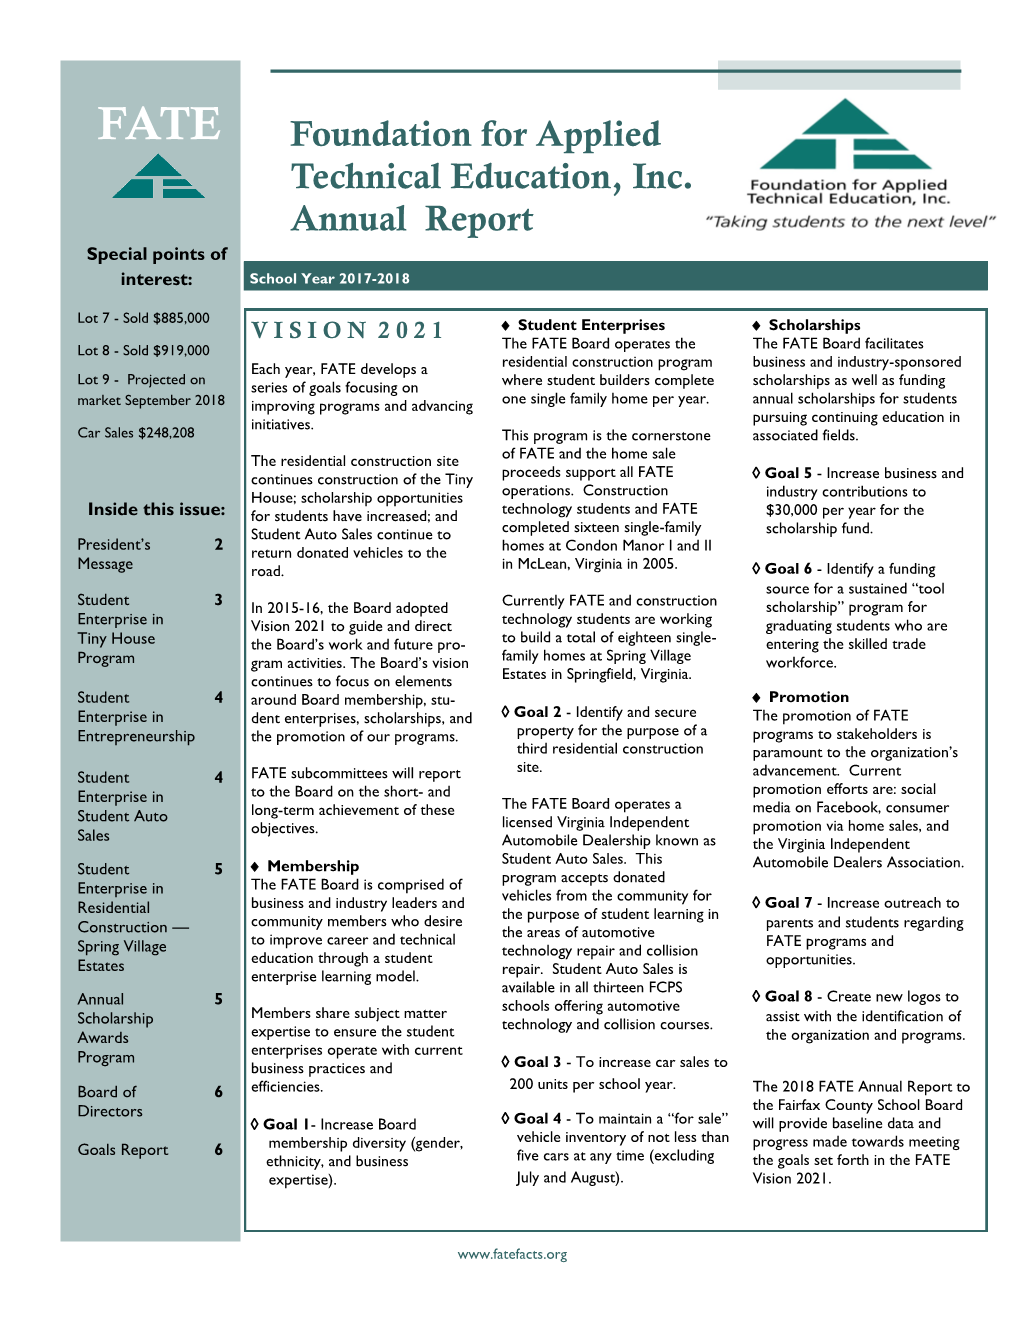 FATE Foundation for Applied Technical Education, Inc. Annual Report Special Points of Interest: School Year 2017-2018